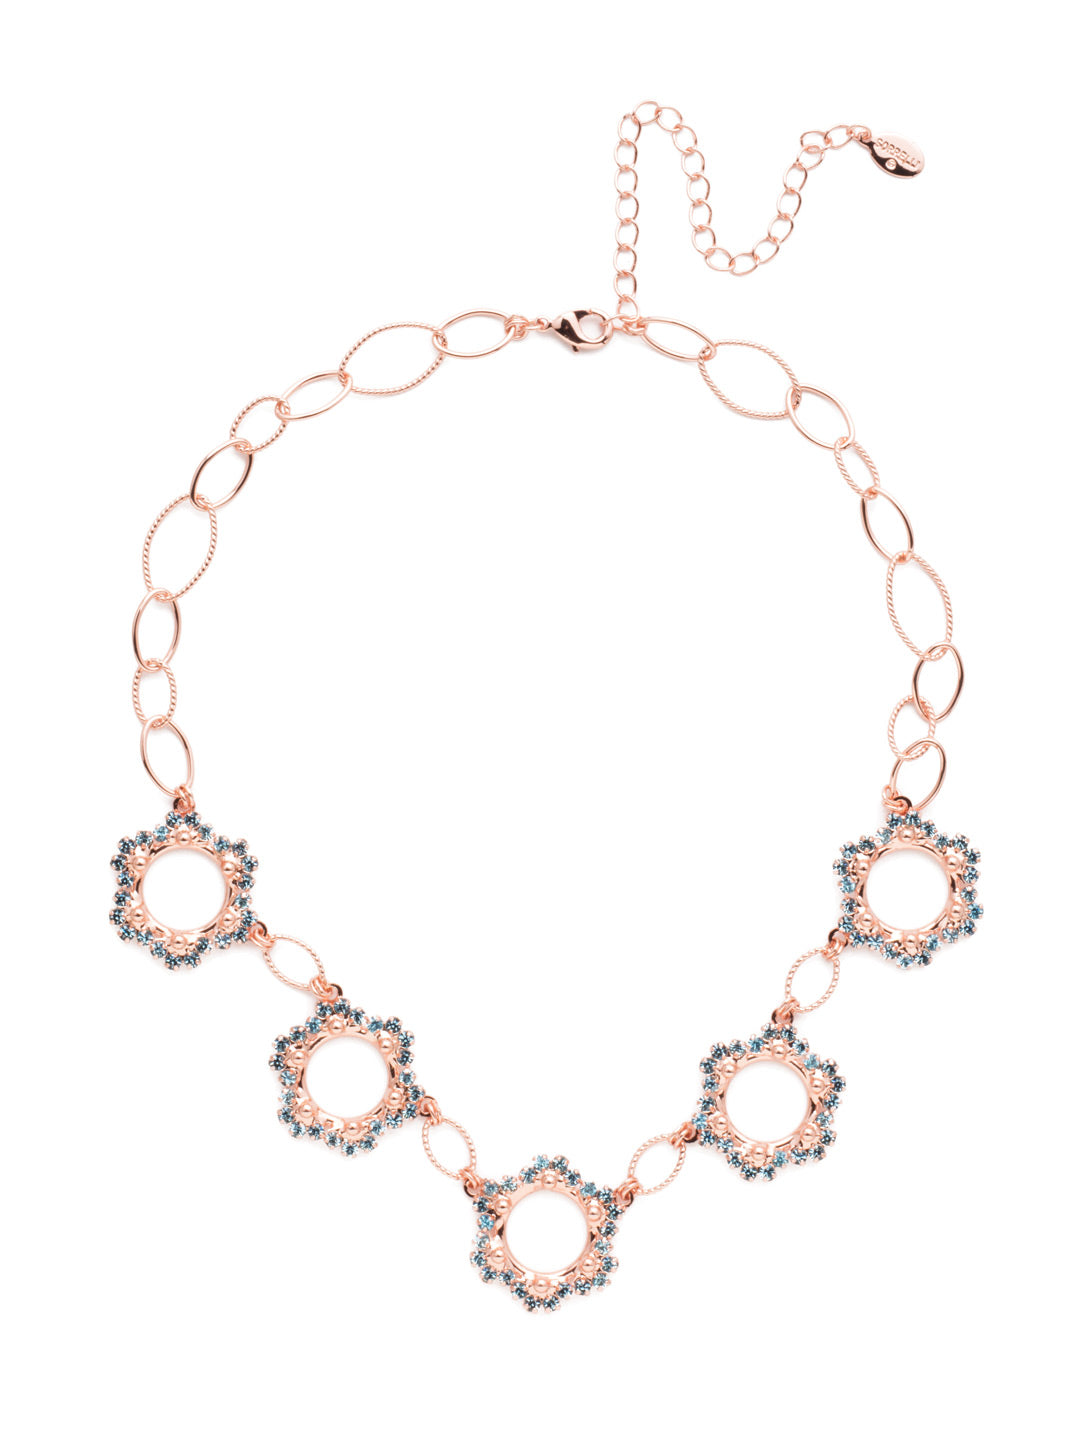 Leva Statement Necklace - NET8RGCAZ - The Leva Statement Necklace refuses to be ignored. Wear the one-of-a-kind piece that features fun filligree metalwork combined with classic links. From Sorrelli's Crystal Azure collection in our Rose Gold-tone finish.